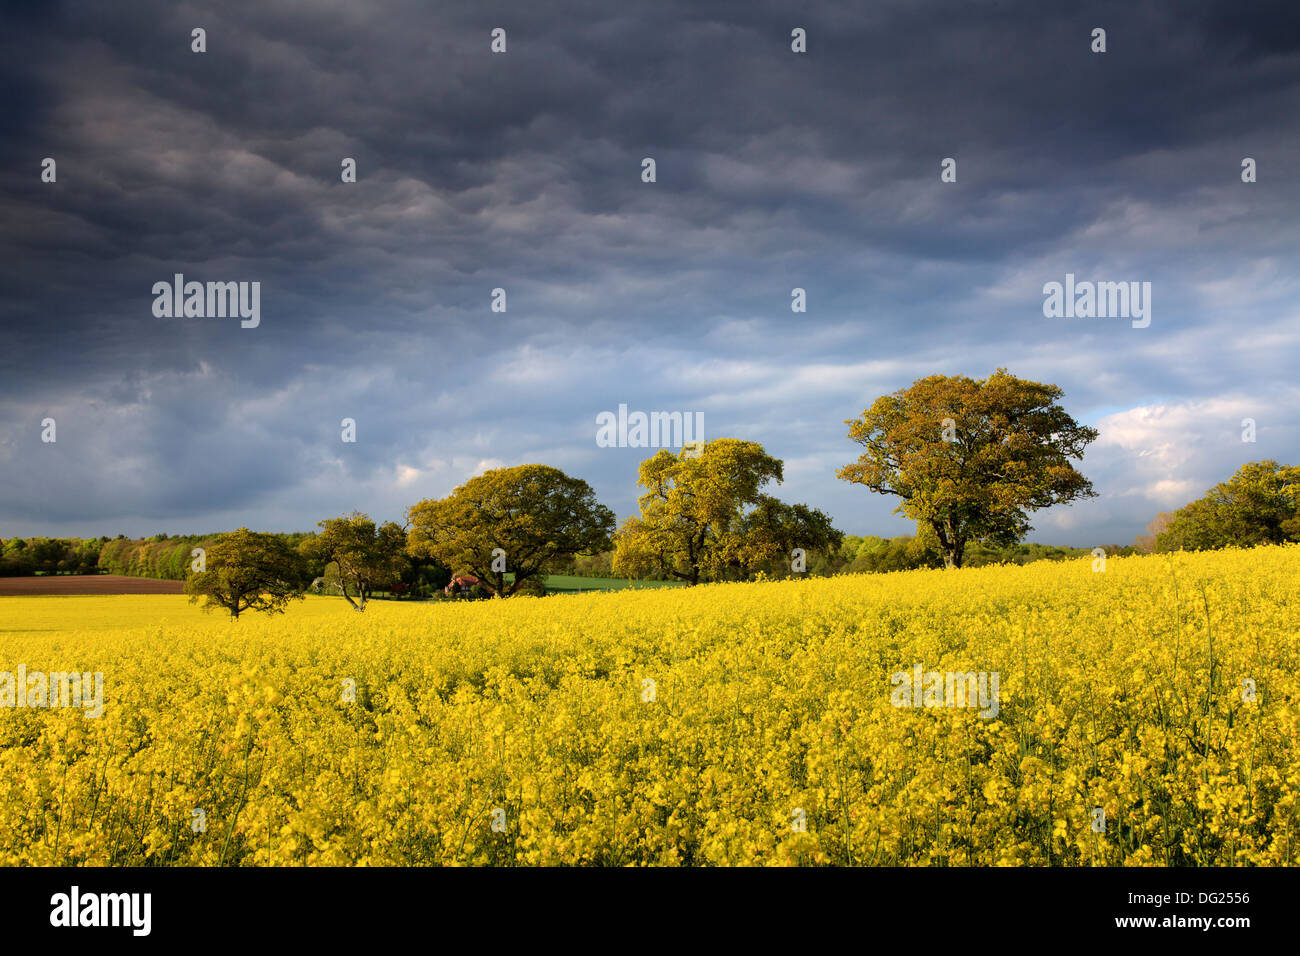 Storm cloud building over row of trees in field of oil seed rape, Hammerpot, West Sussex Stock Photo